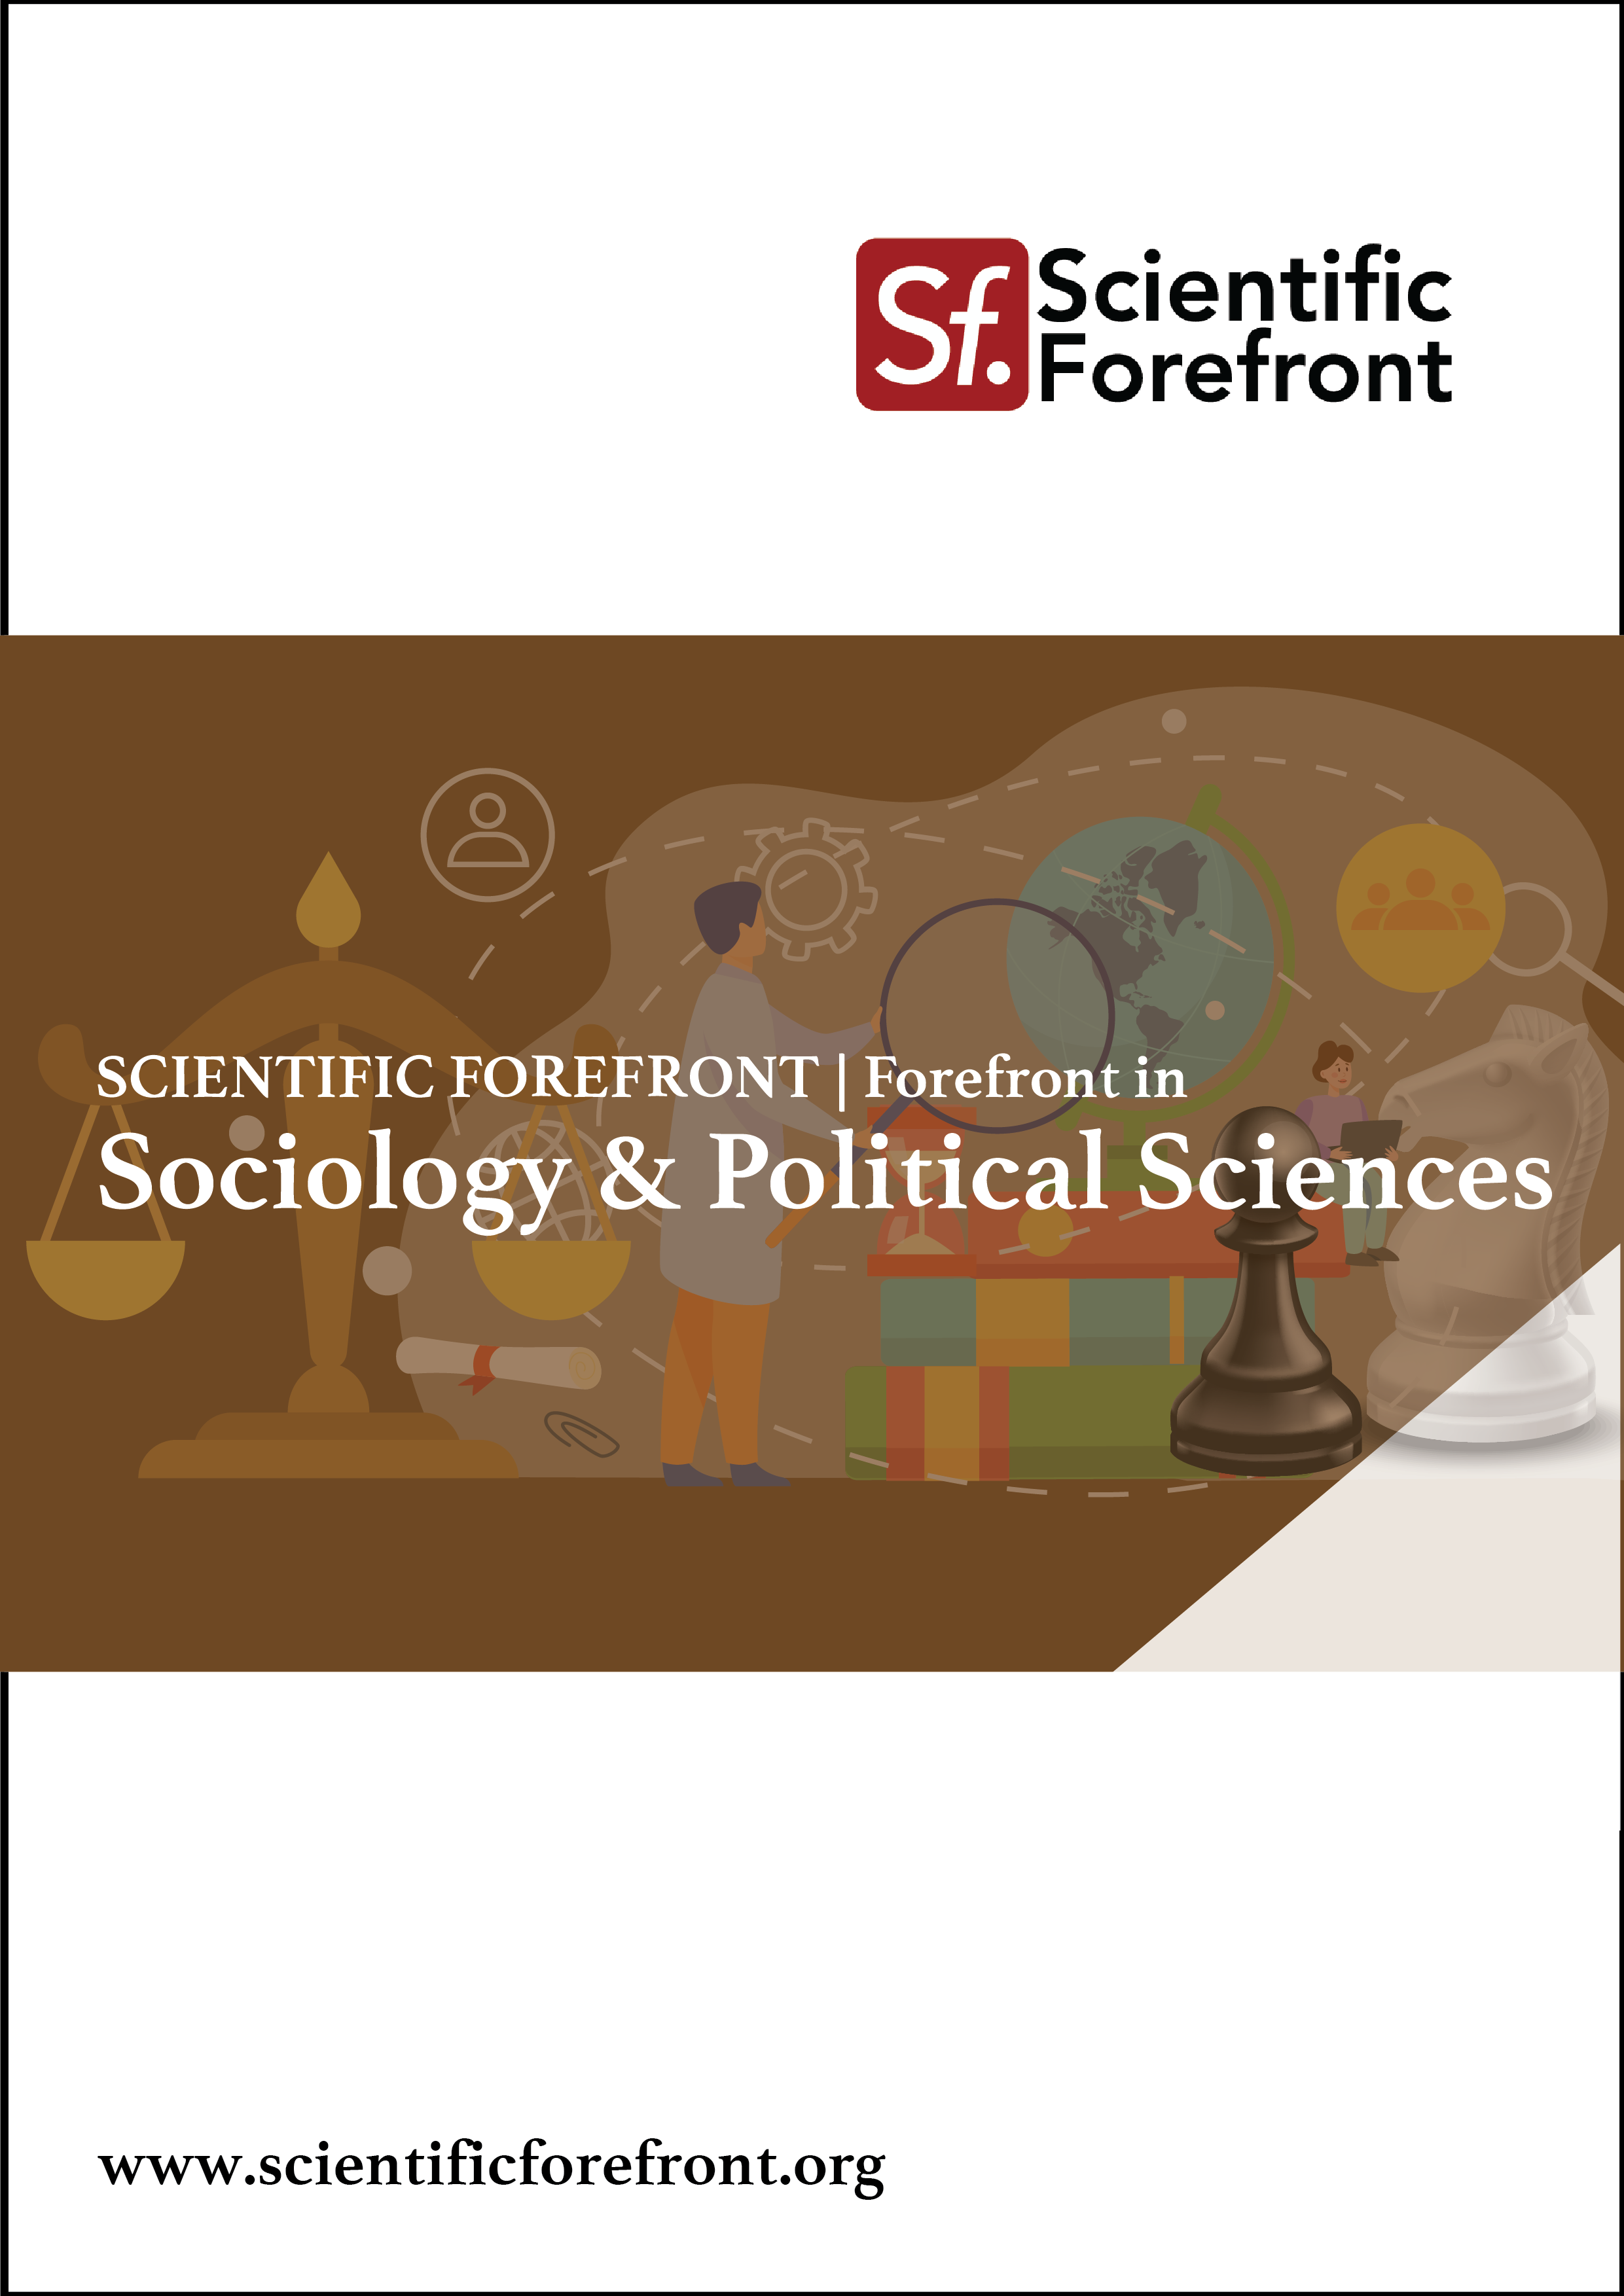 Forefront in Sociology & Political Sciences